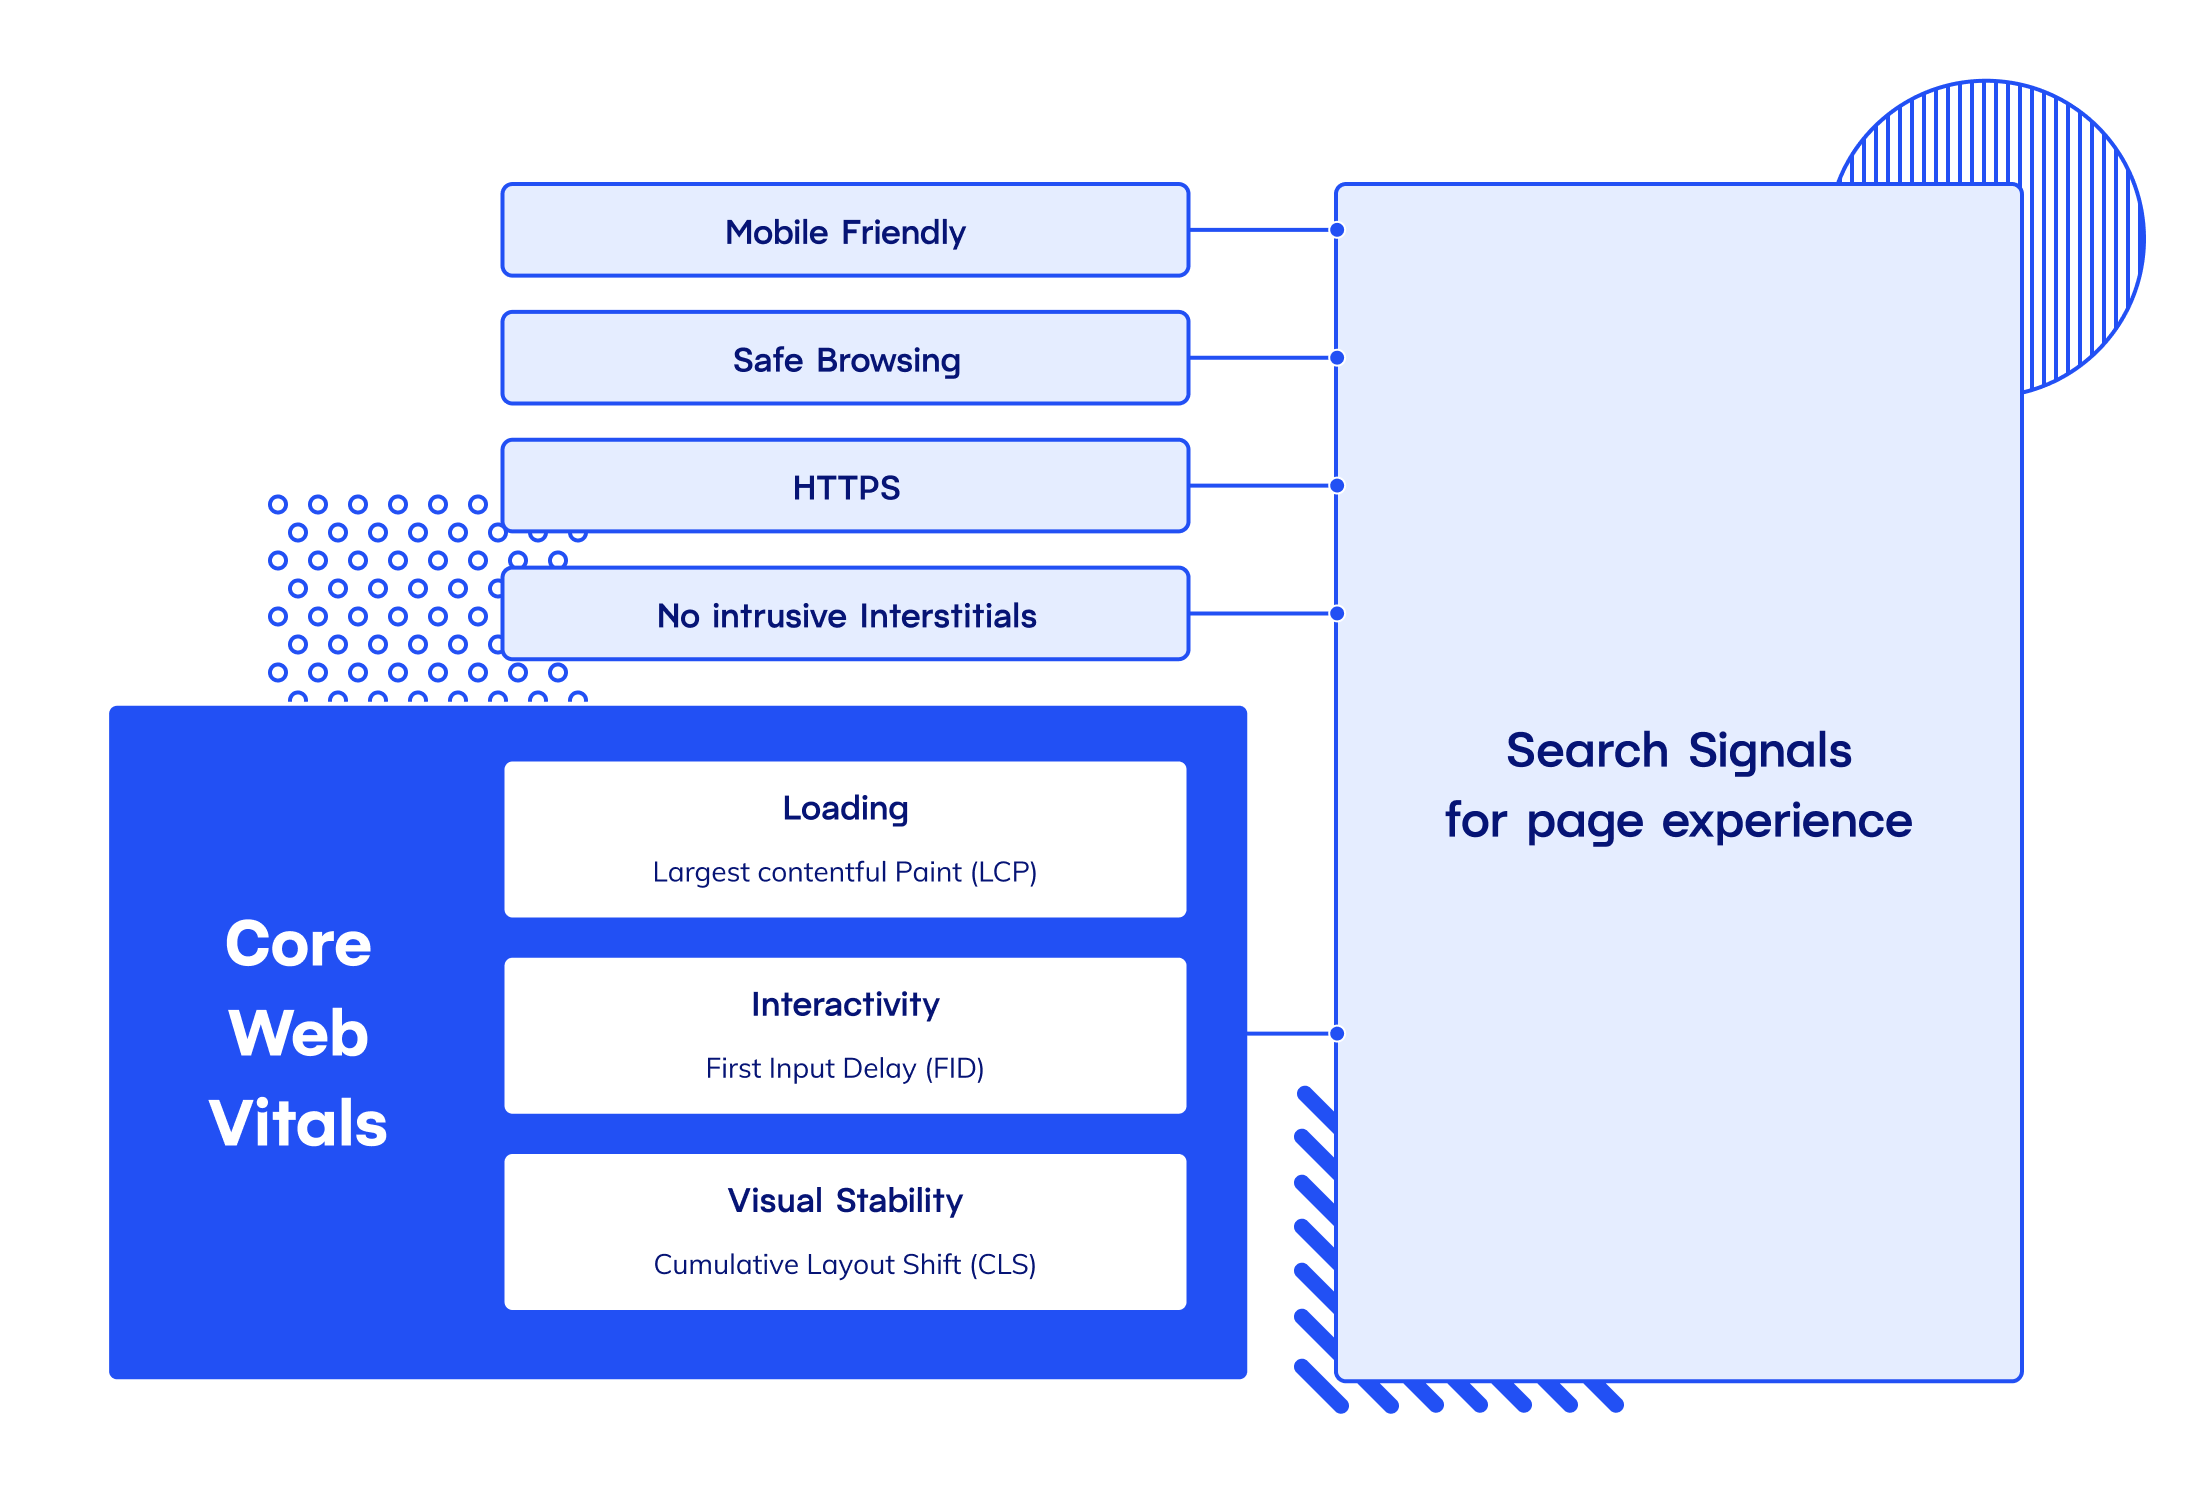 Page experience signals in CWV